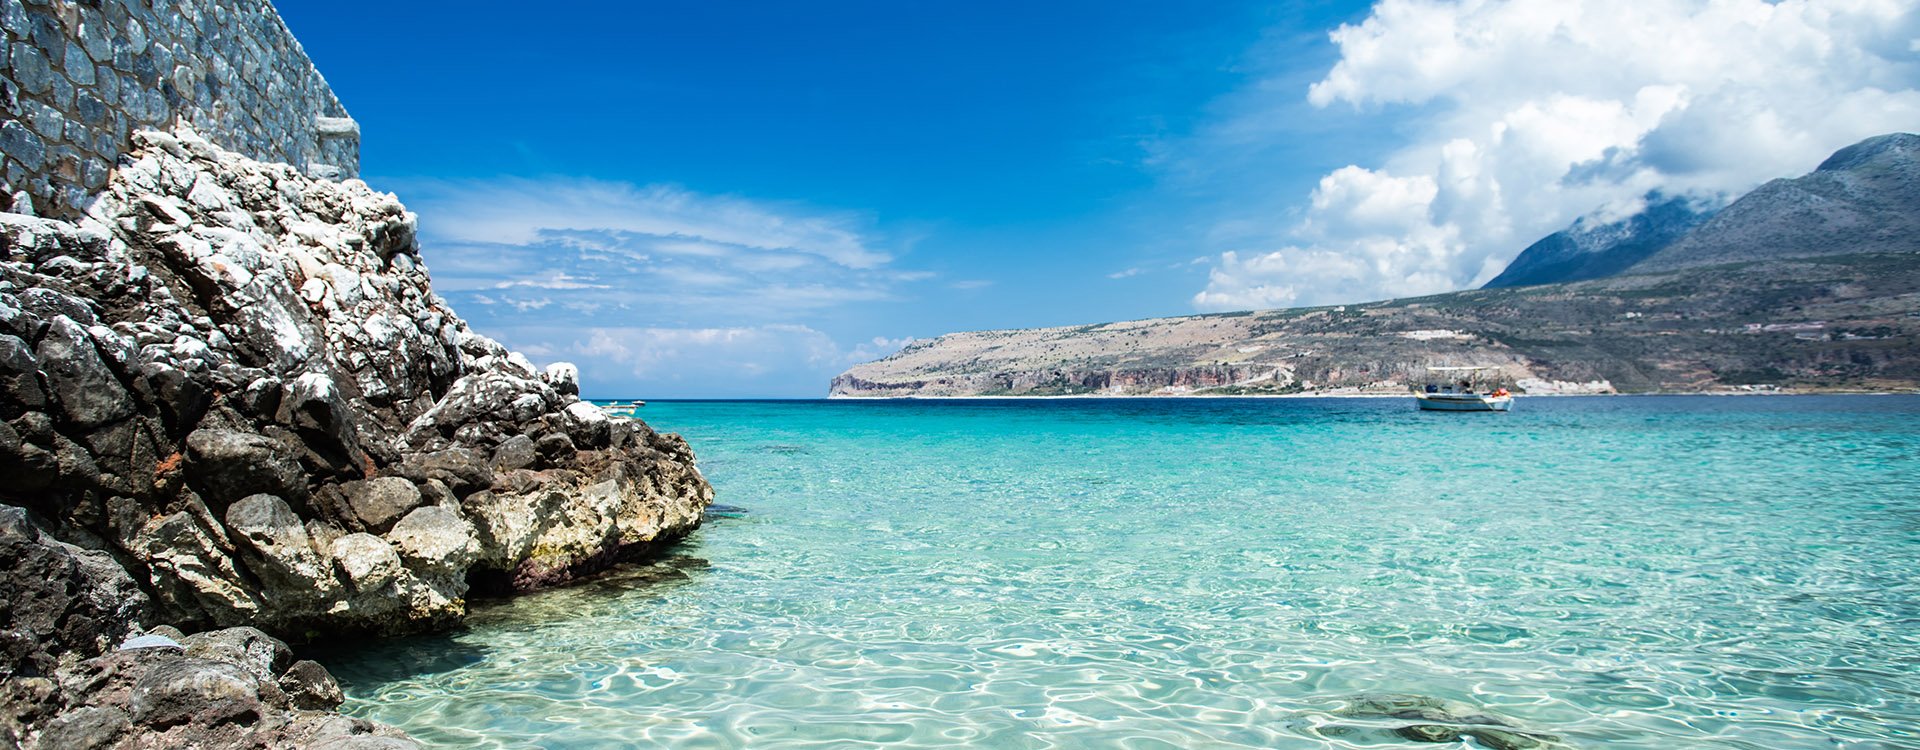 Turquoise waters of mediterranean sea with cliffs. Peloponnese, Limeni, Greece.